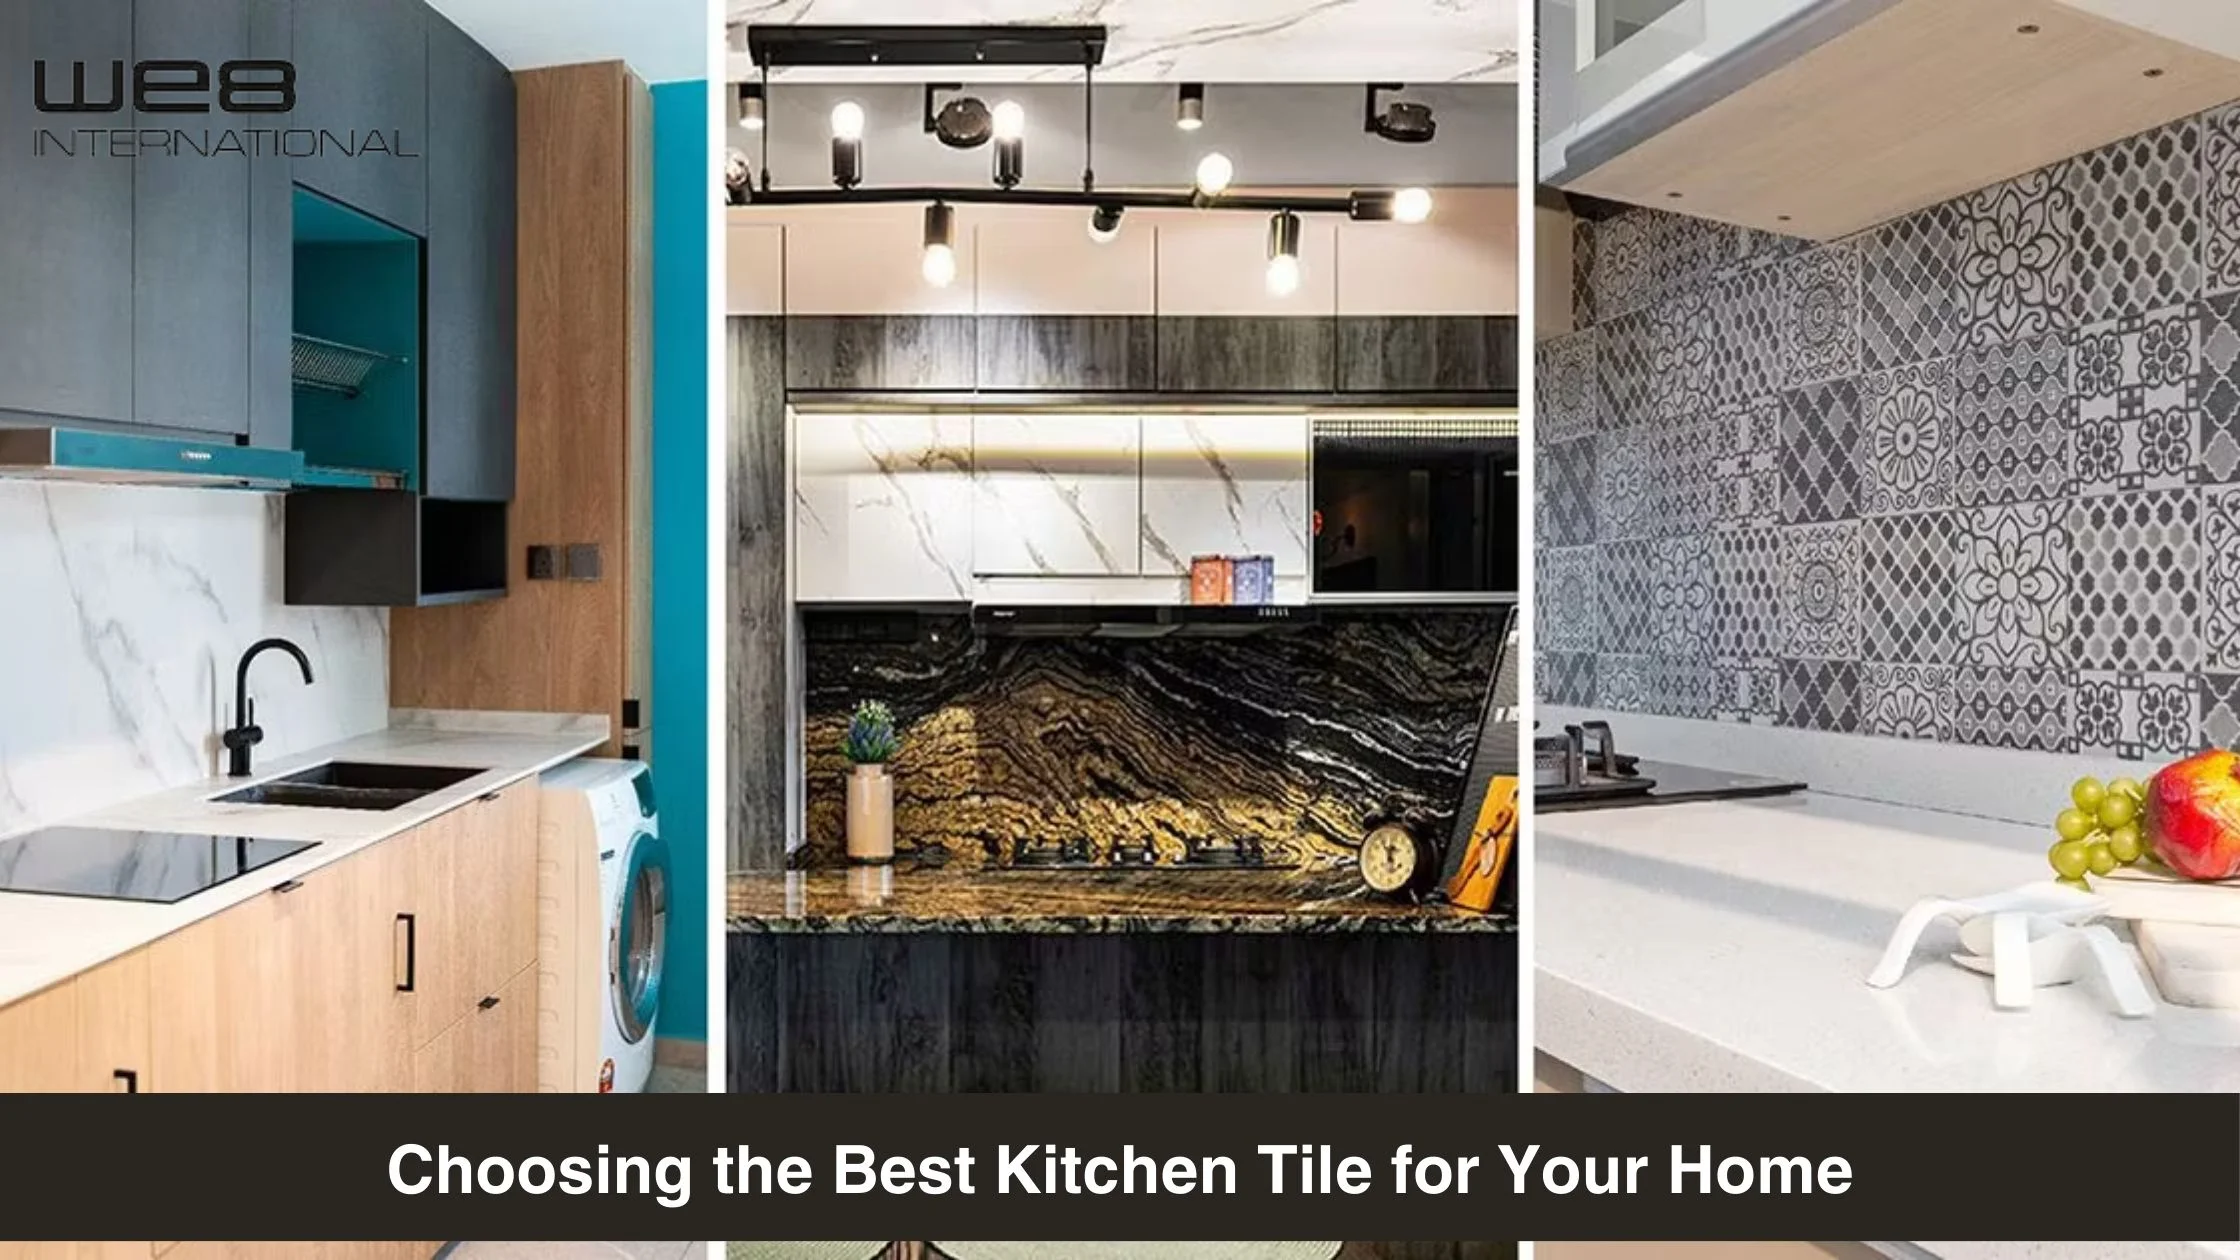 Choosing the Best Kitchen Tile for Your Home